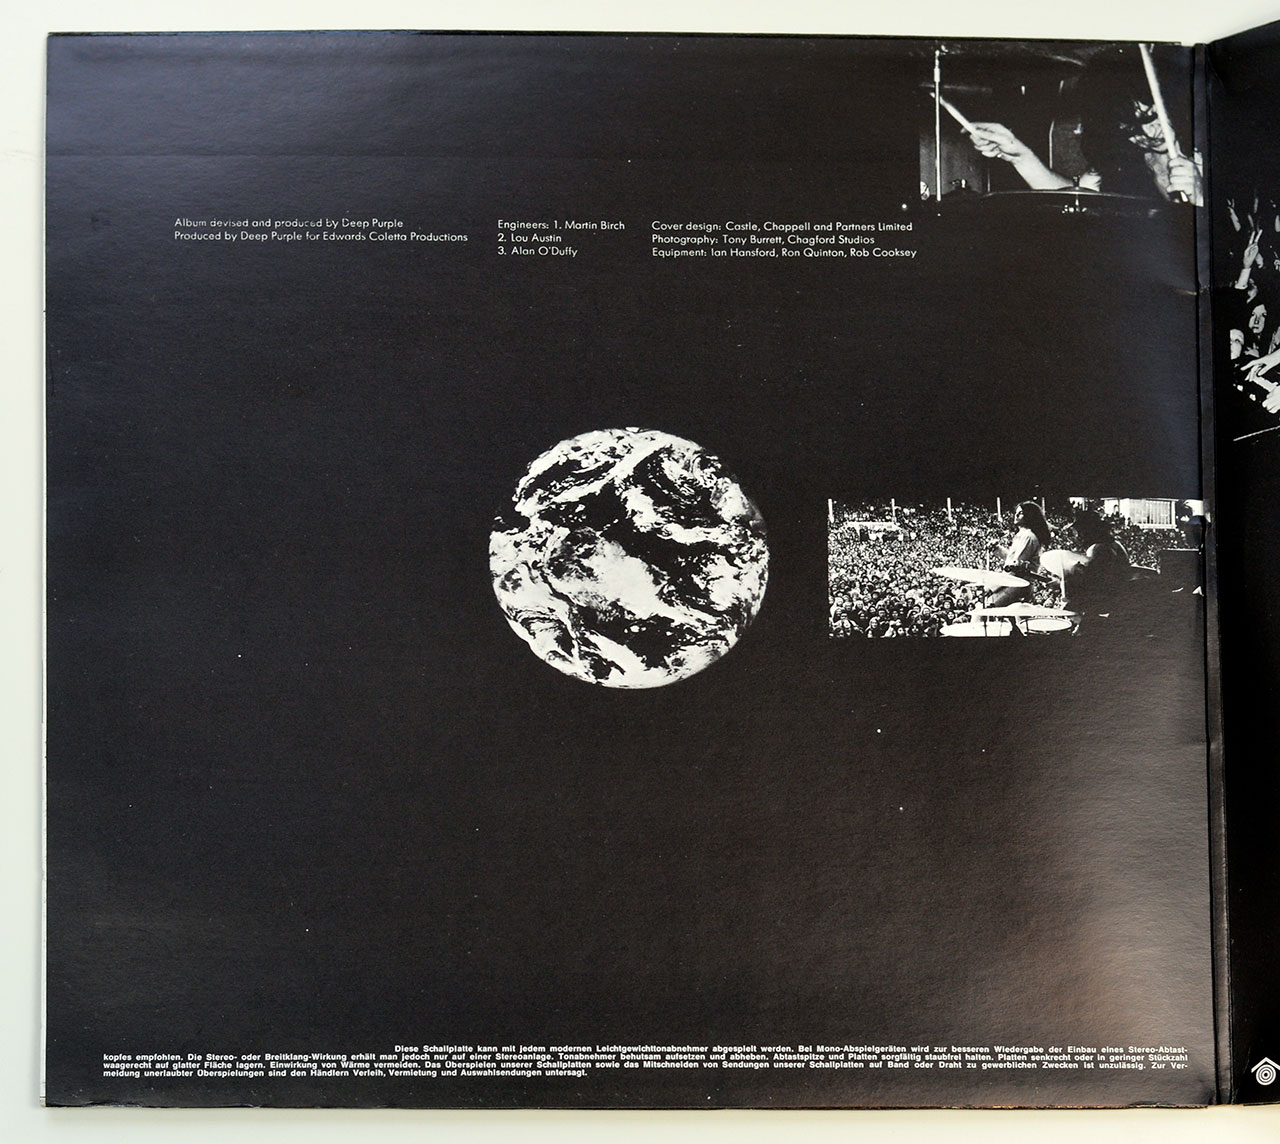 High Resolution Photo of the Inside Page of the Gatefold Cover Side One of DEEP PURPLE - Fireball (Netherlands) https://vinyl-records.nl